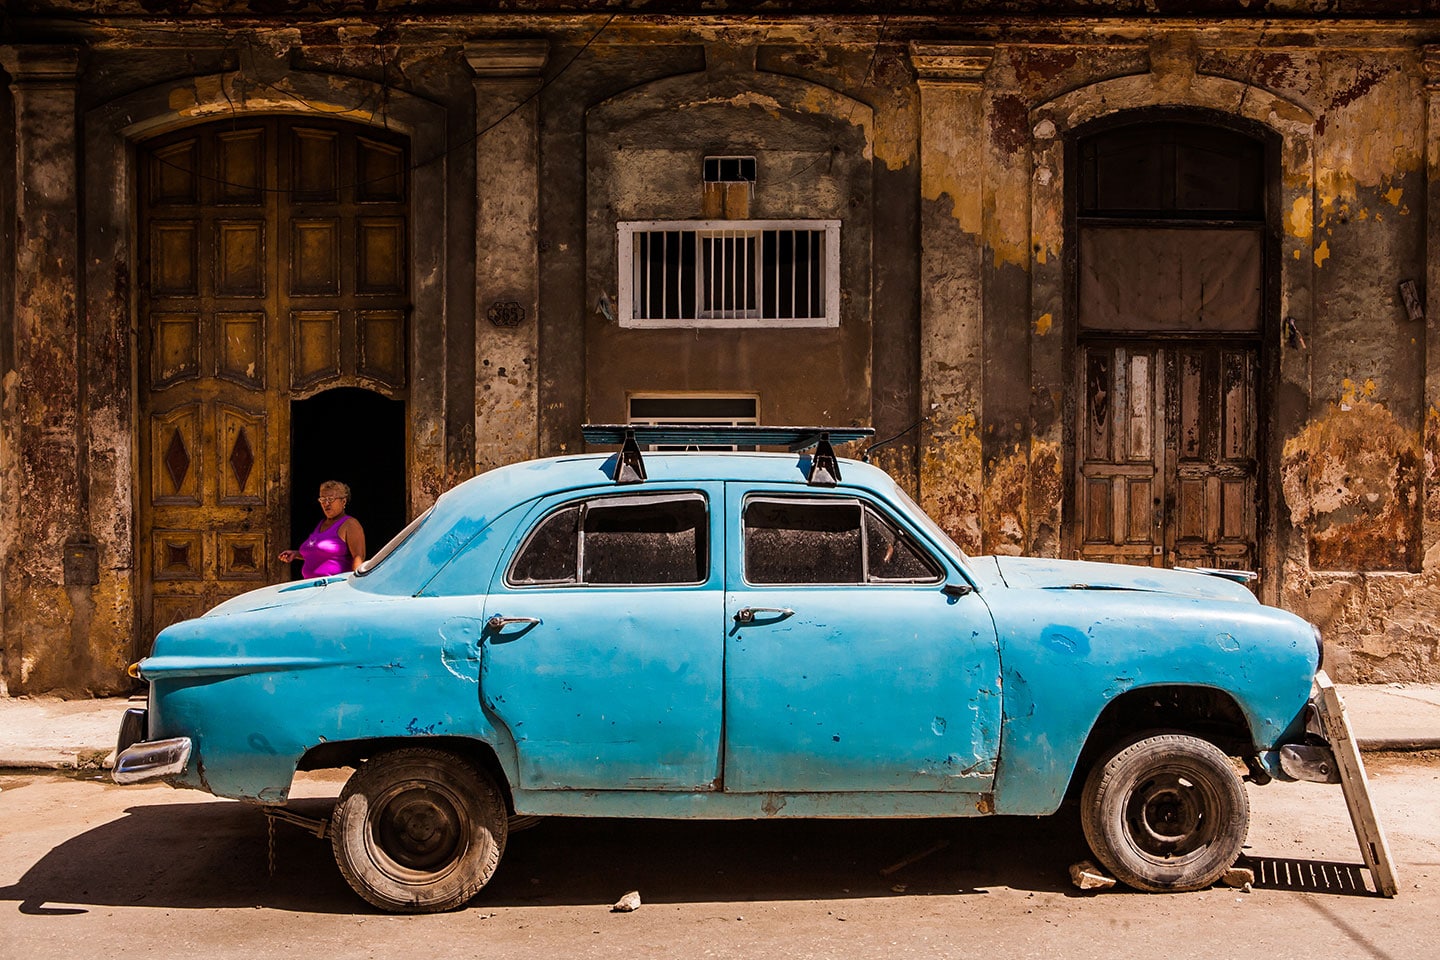 Vintage car being repaired on the streets of Havana, Cuba